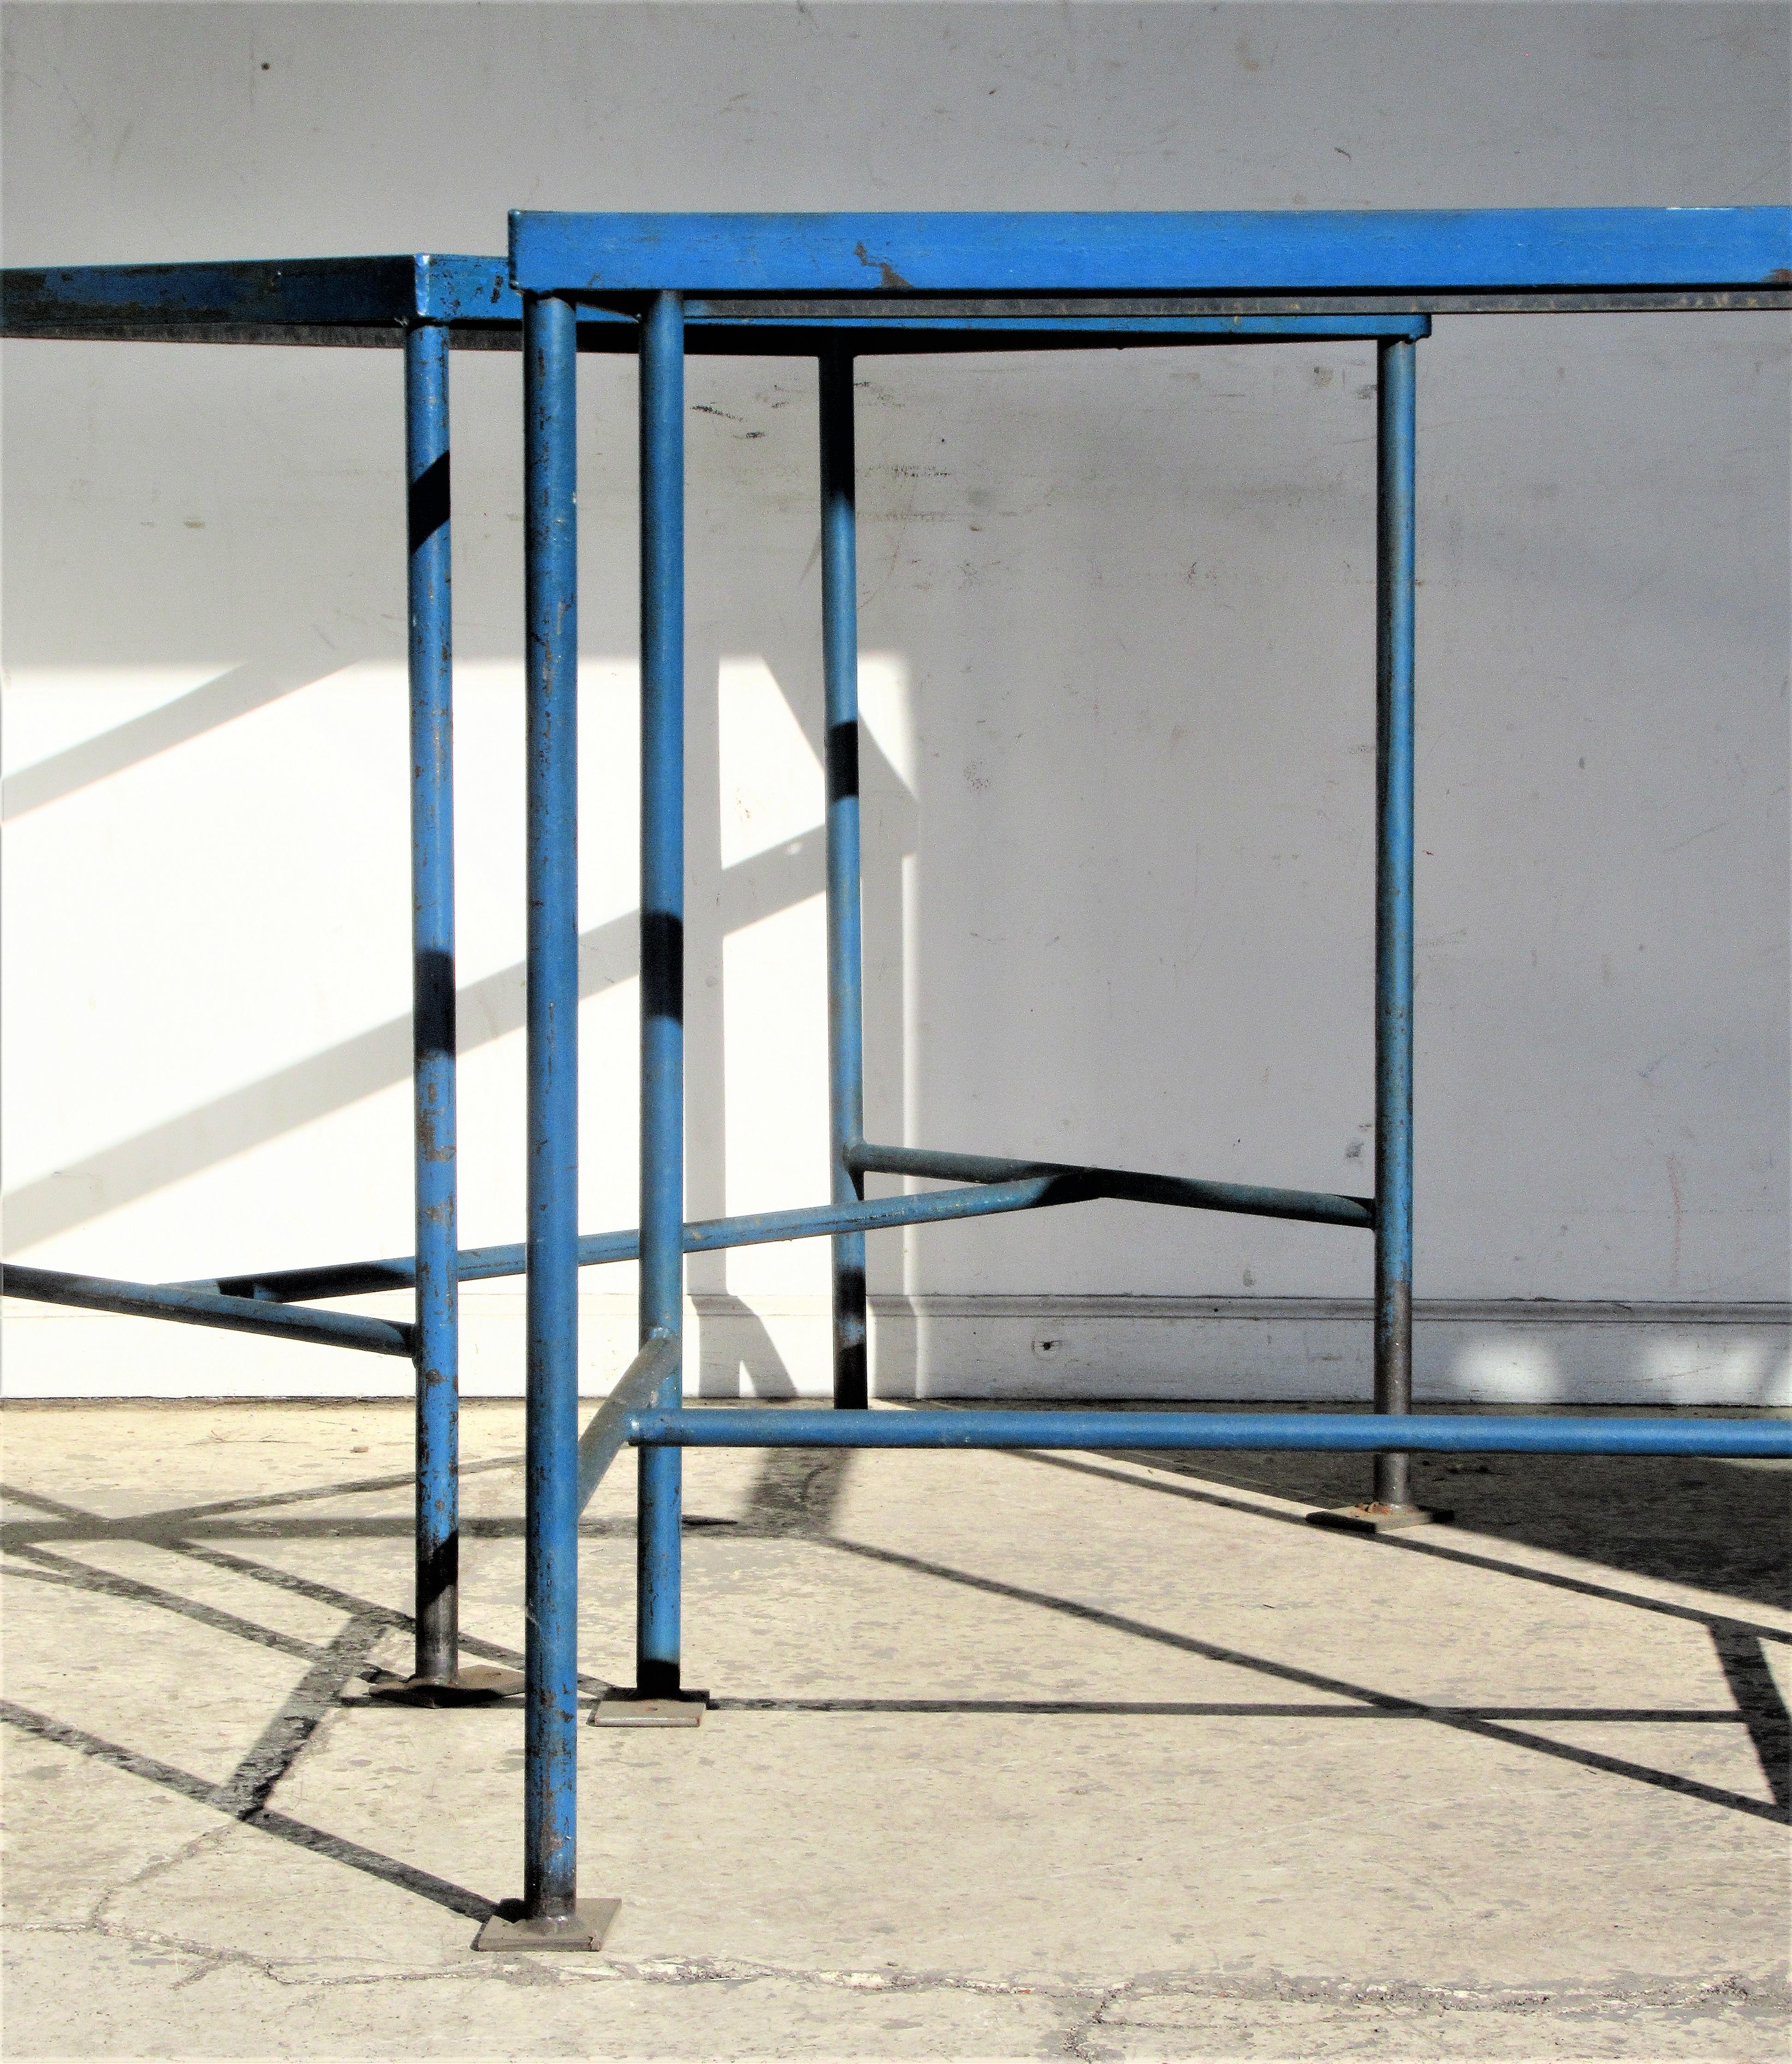 Pair of antique American industrial rectangular iron tables with great architectonic form and the best beautifully aged old original blue enamel painted surface. Direct from a long closed factory in Central New York State, Circa 1930 - 1940.